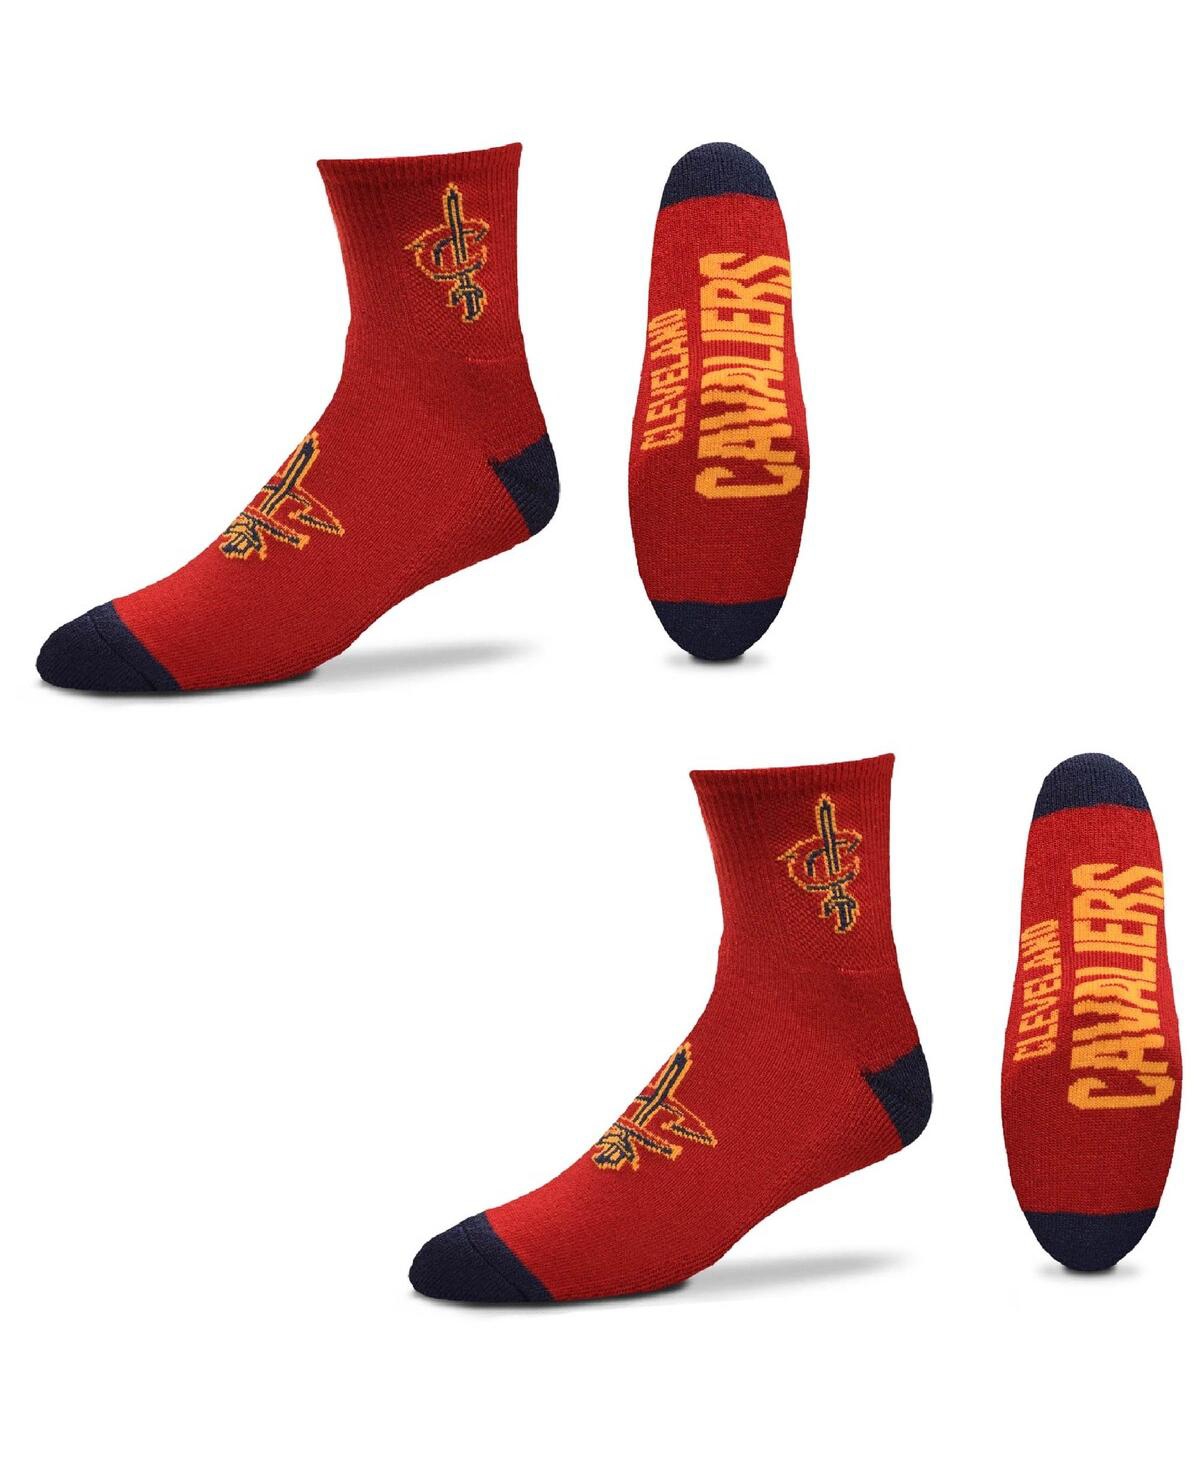 For Bare Feet Women's Cleveland Cavaliers Quarter-length Socks Two-pack Set In Red